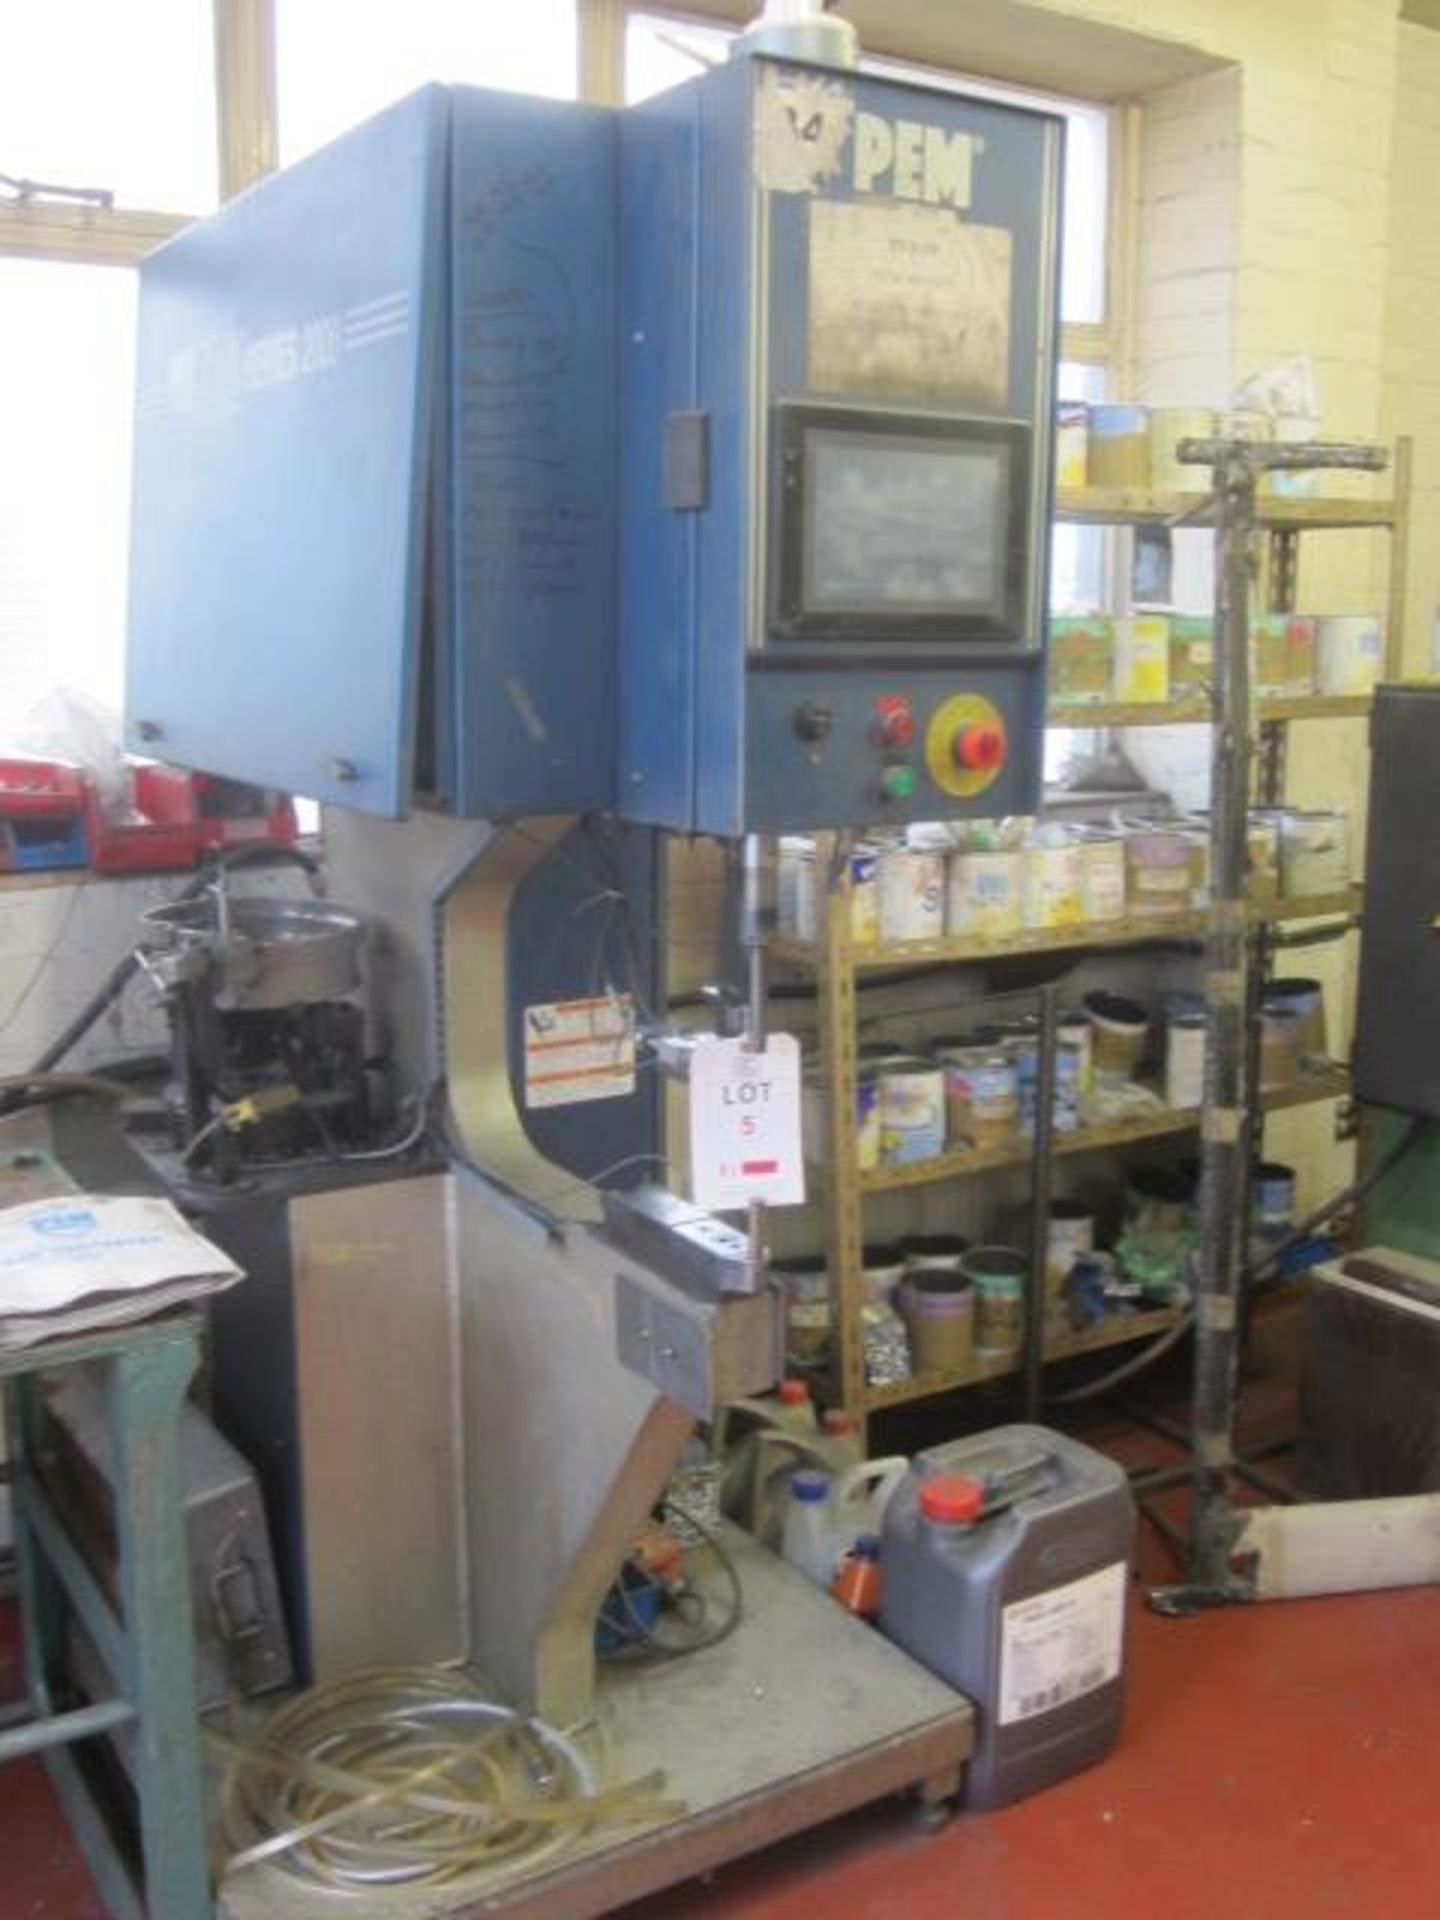 PEMSerter Series 2000 press, series 2000A, serial no. 2004 A 172, touch screen control, feeder - Image 2 of 8